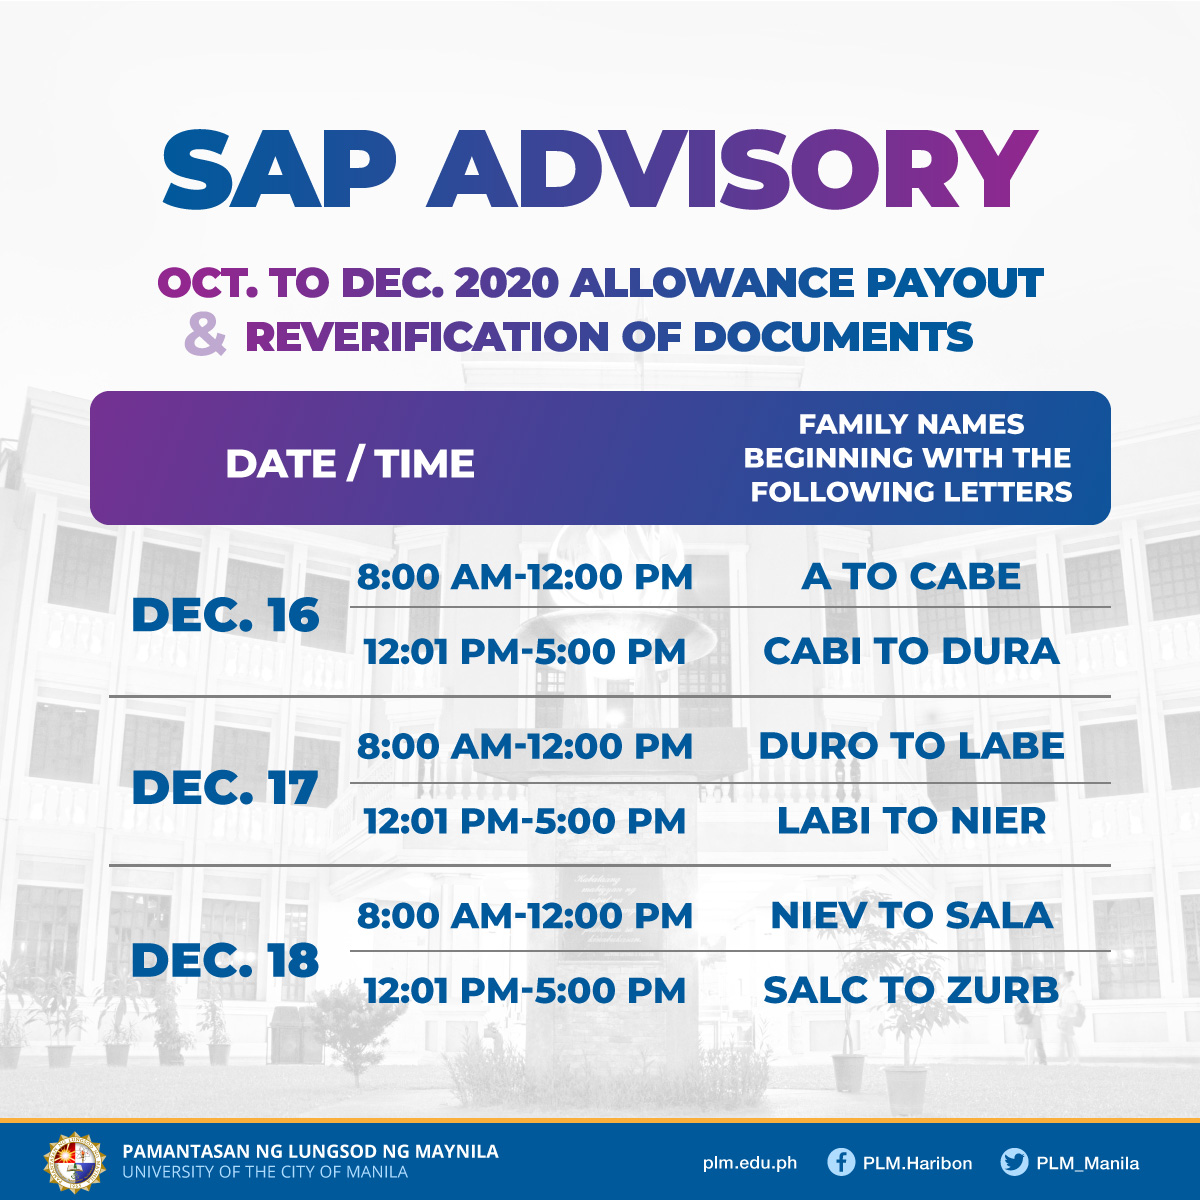 PLM vows timely release of student SAP payouts for remaining distribution days